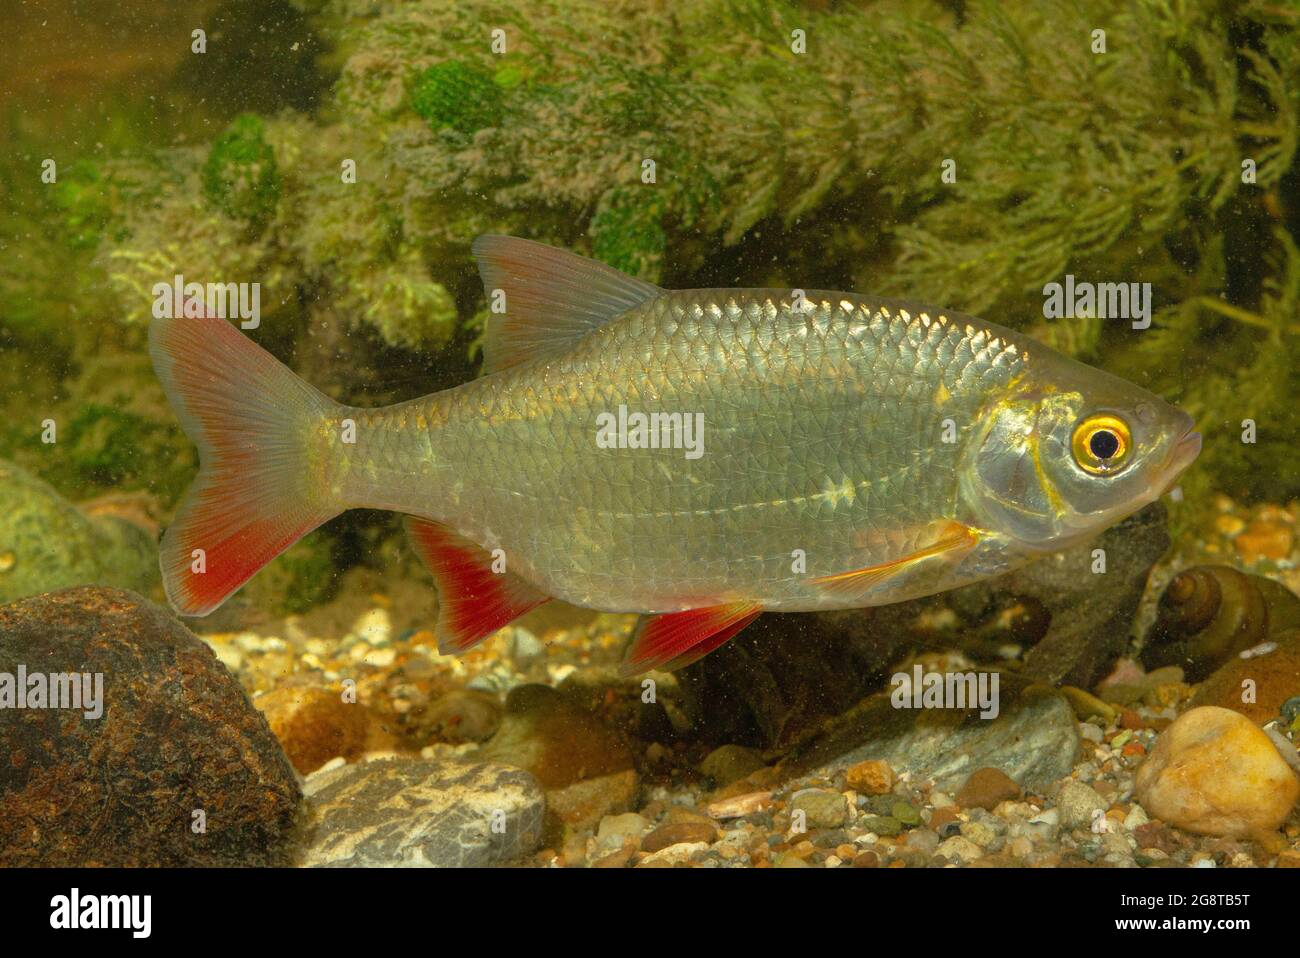 rudd (Scardinius erythrophthalmus), swimming in front of hornworts, Germany Stock Photo